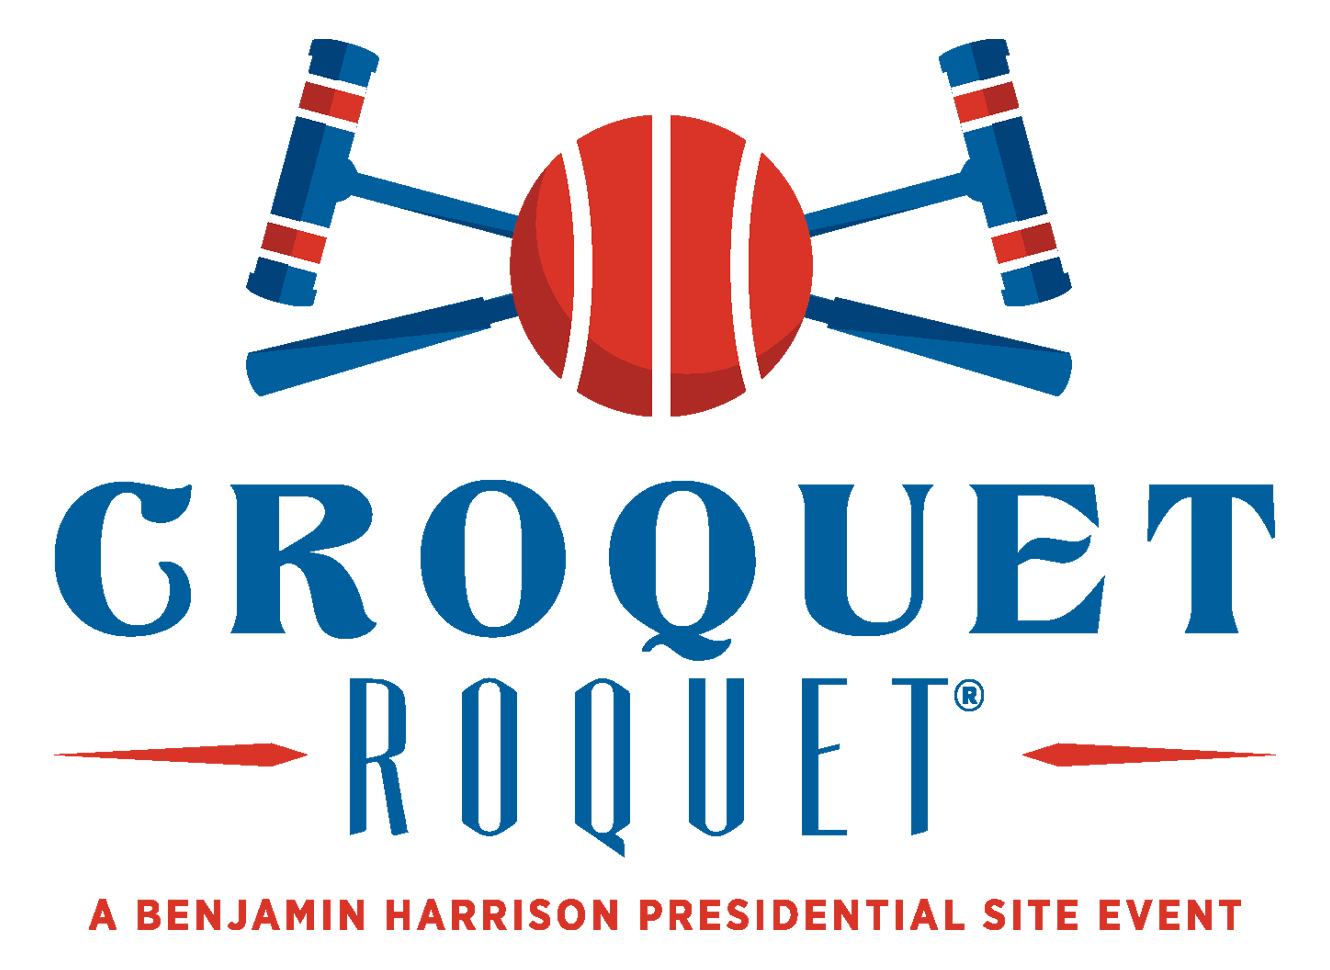 Logo for Croquet Roquet, a Benjamin Harrison presidential site event. The logo depicts two croquet mallets crossing each other, with a ball covering where the mallets overlap.